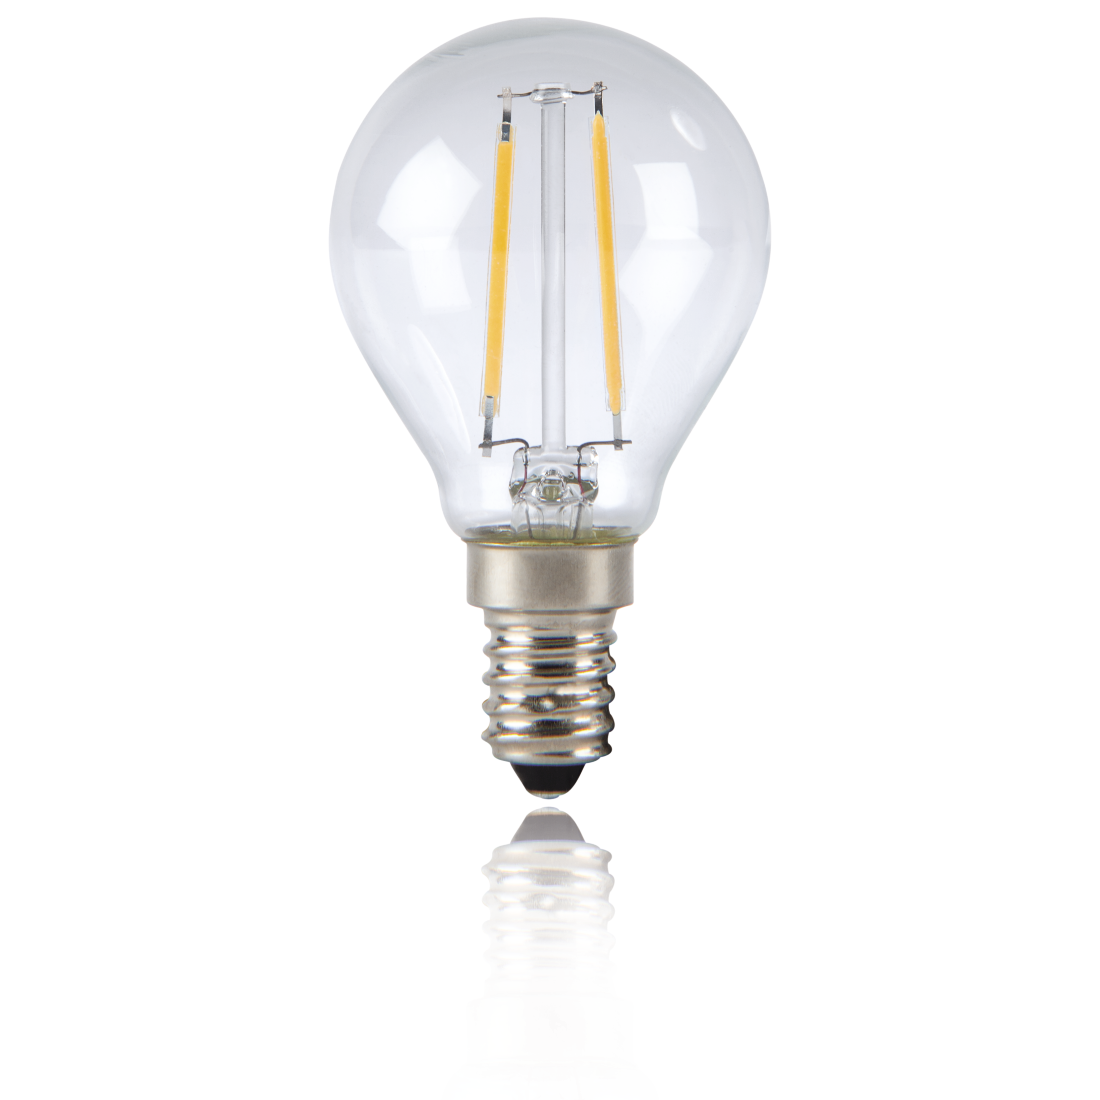 abx2 High-Res Image 2 - Xavax, LED Filament, E14, 250 lm Replaces 25 W, Drop Bulb, warm white